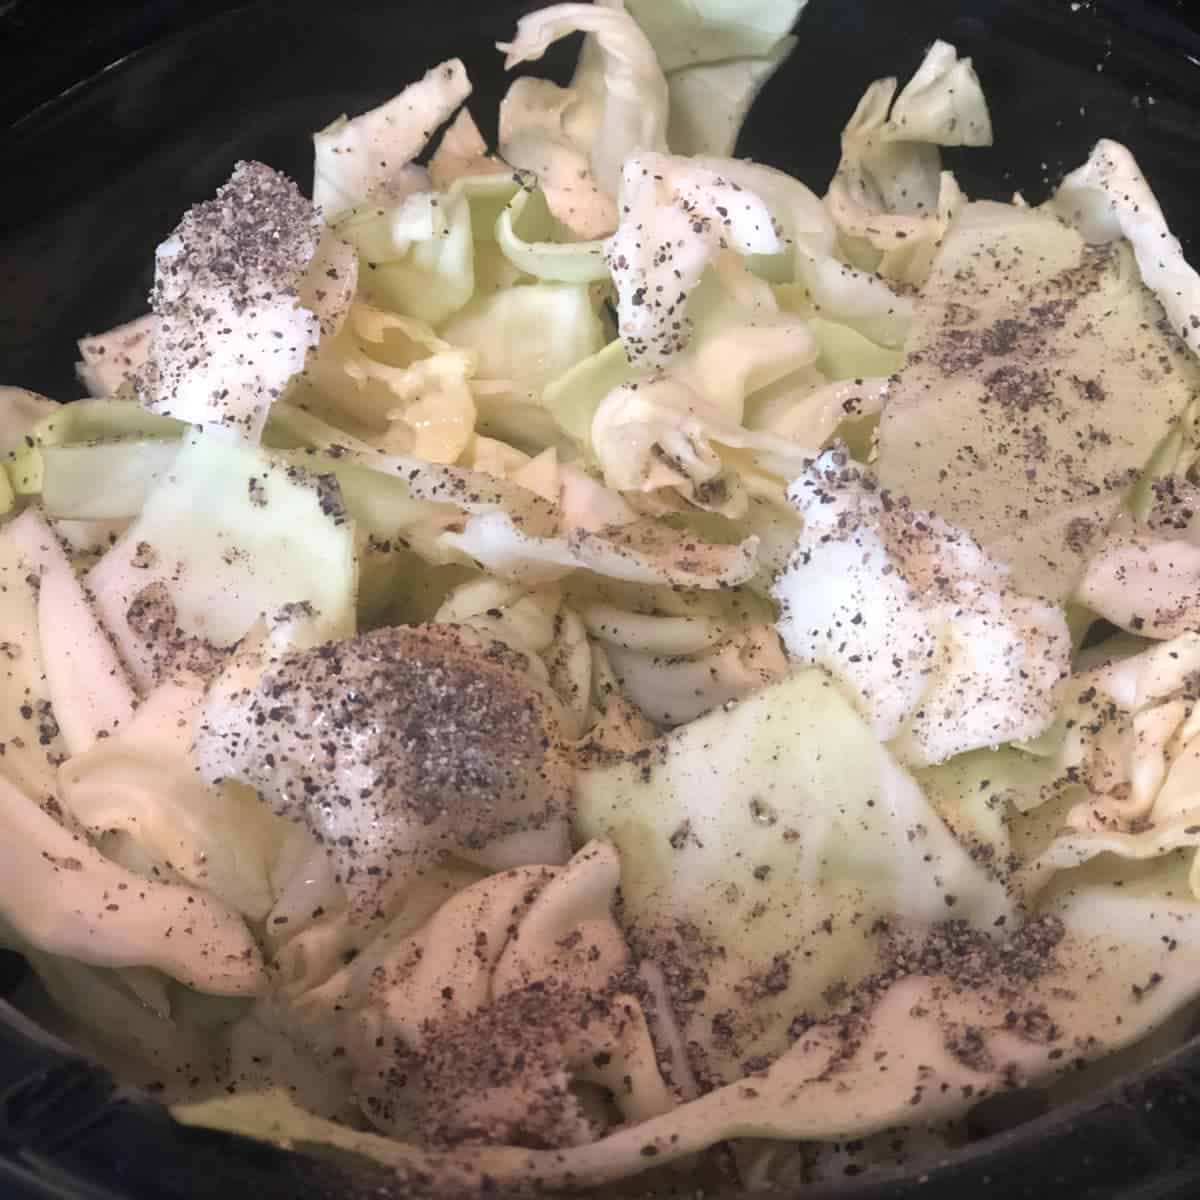 Cabbage sprinkled with pepper.